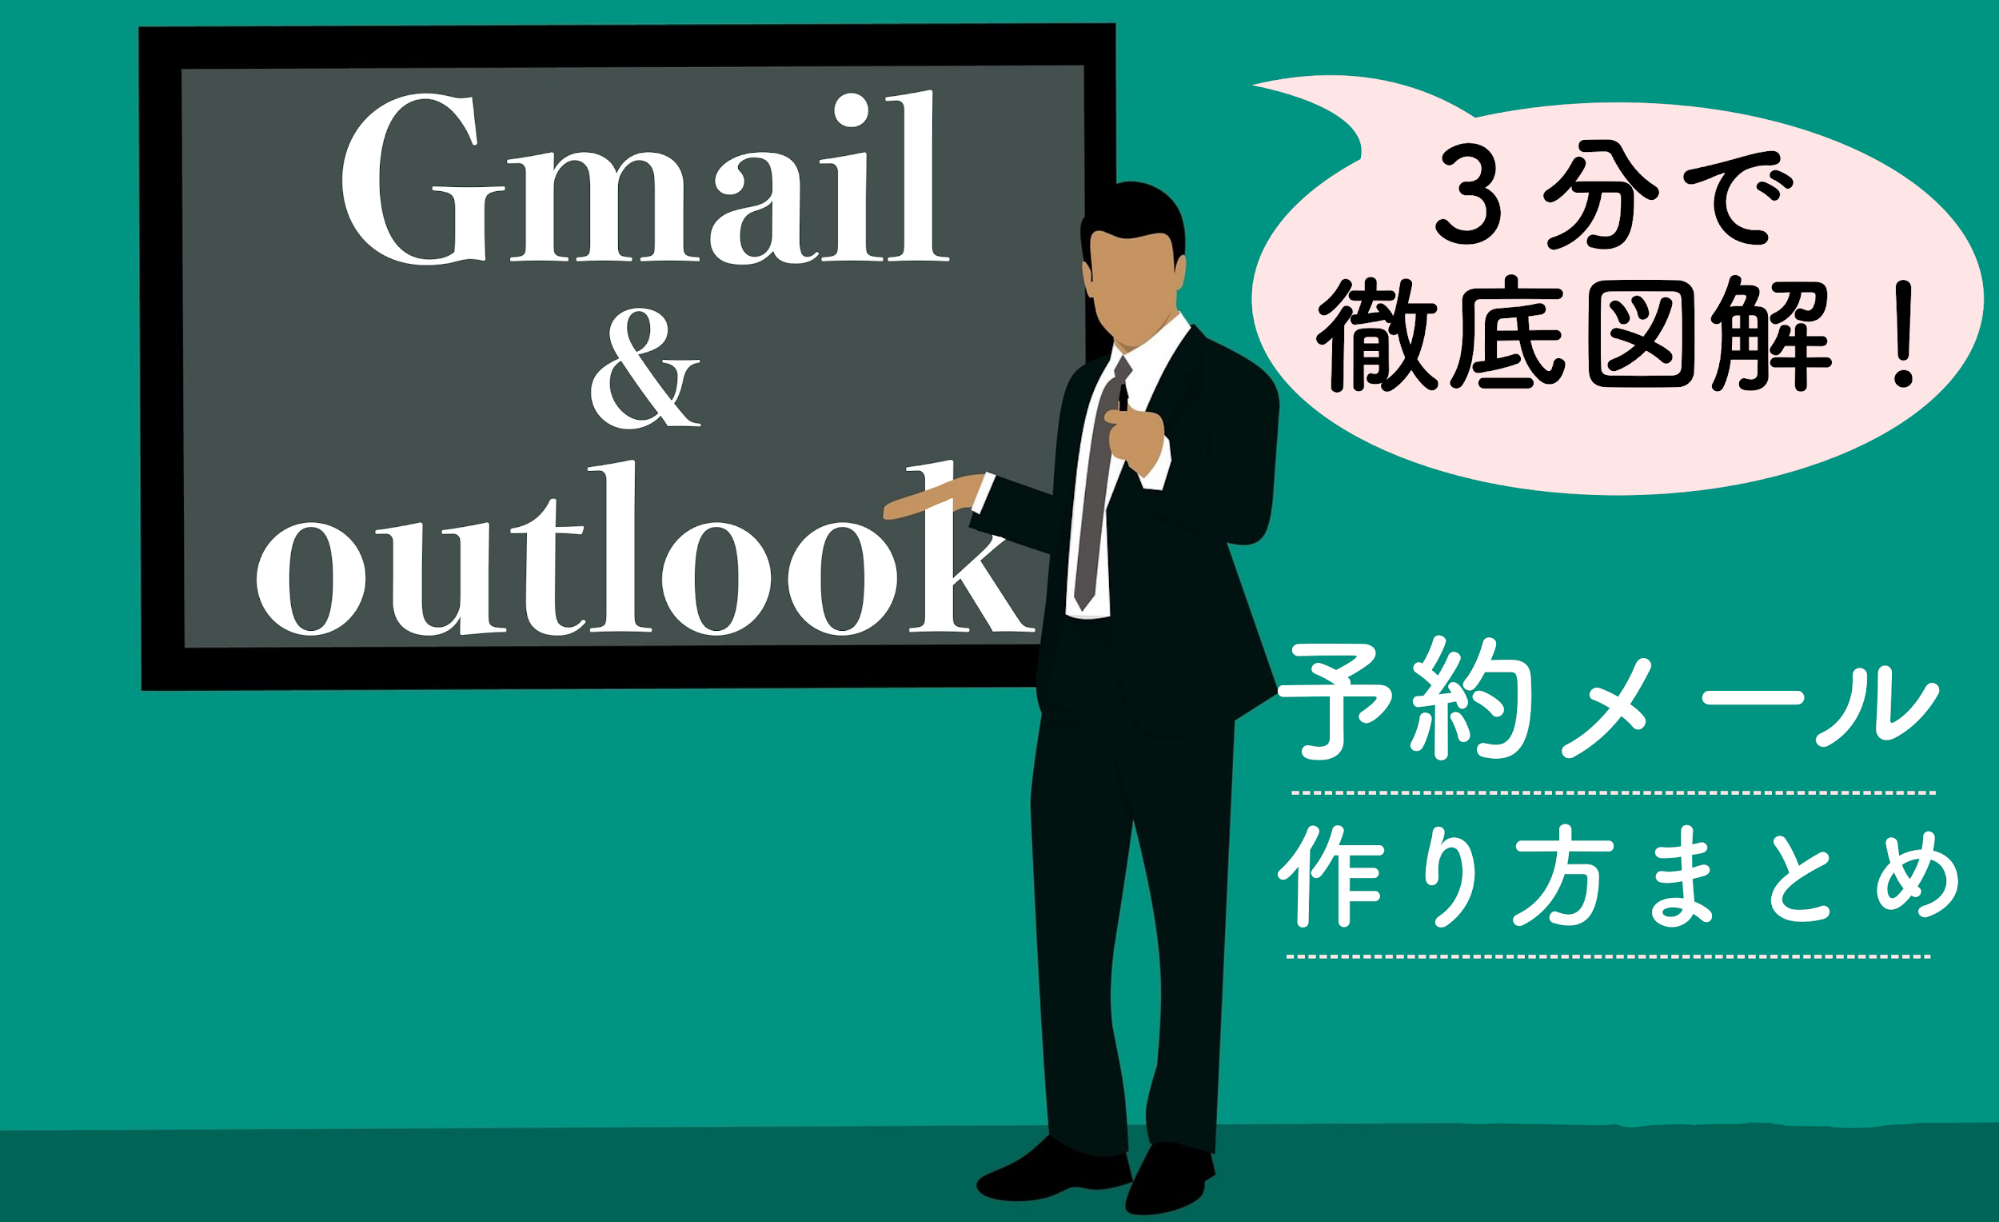 【Gmail】【Outlook】予約メール作成の方法を図解します！